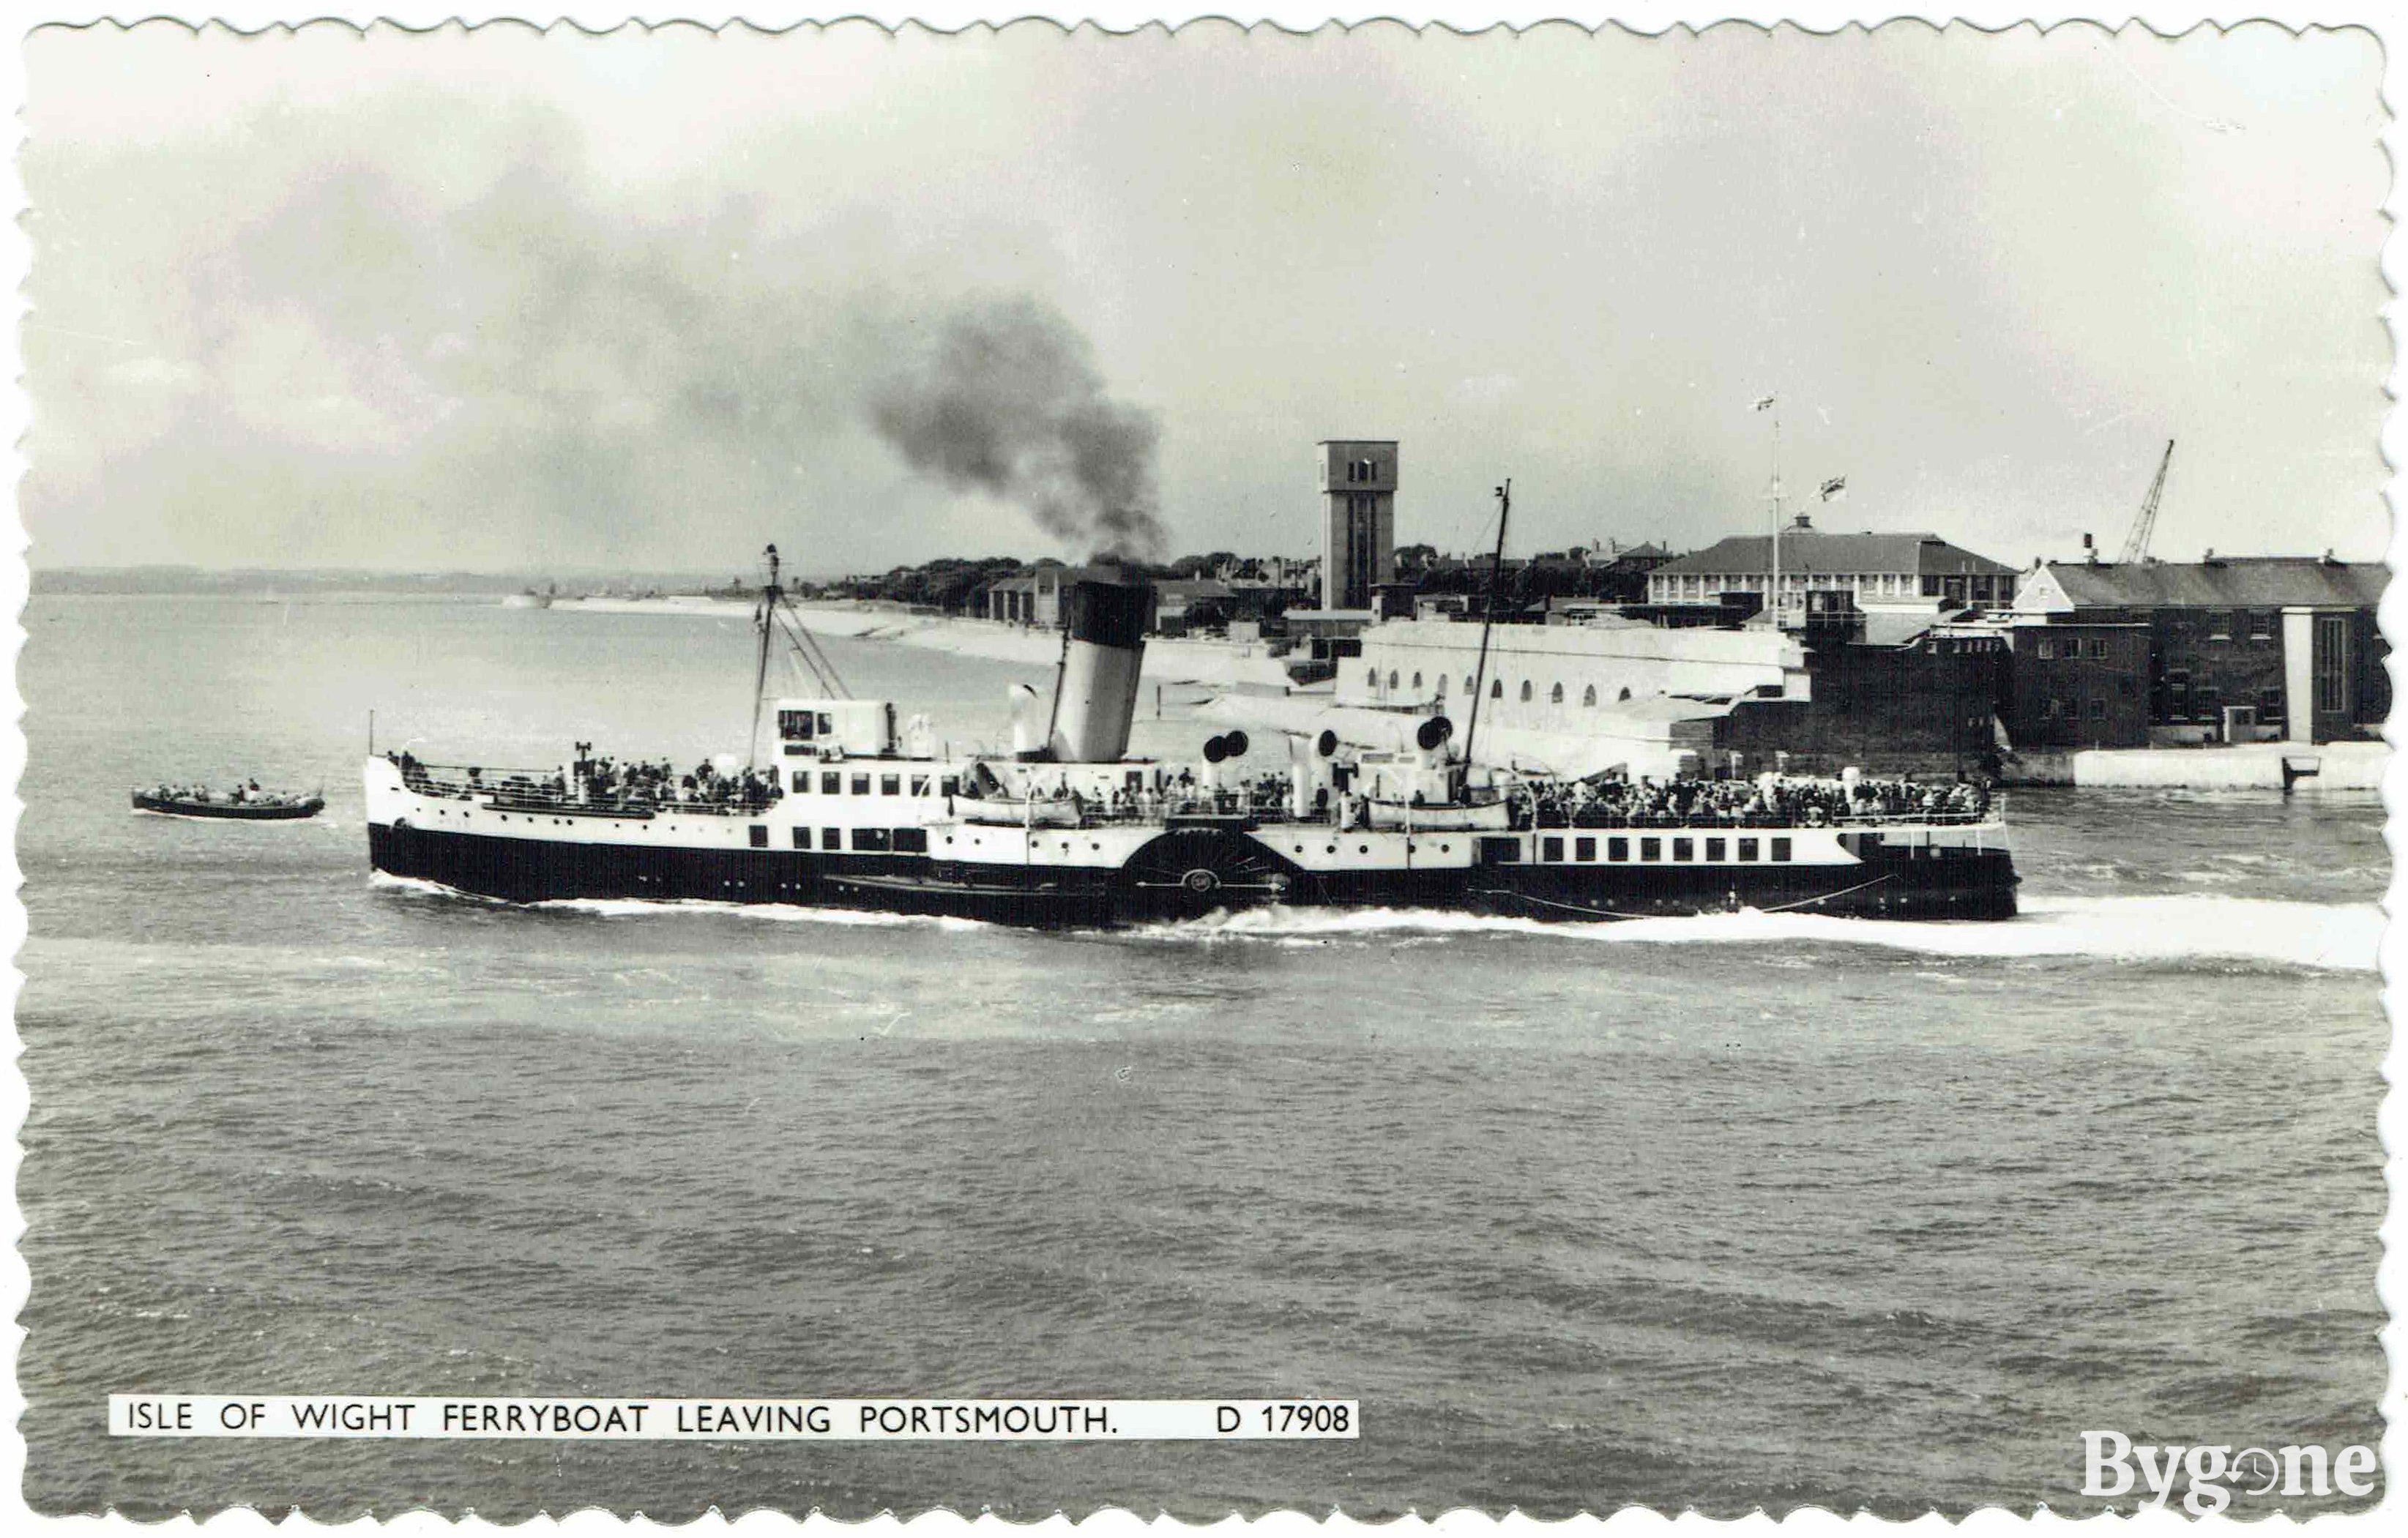 Isle of Wight ferry boat leaving Portsmouth